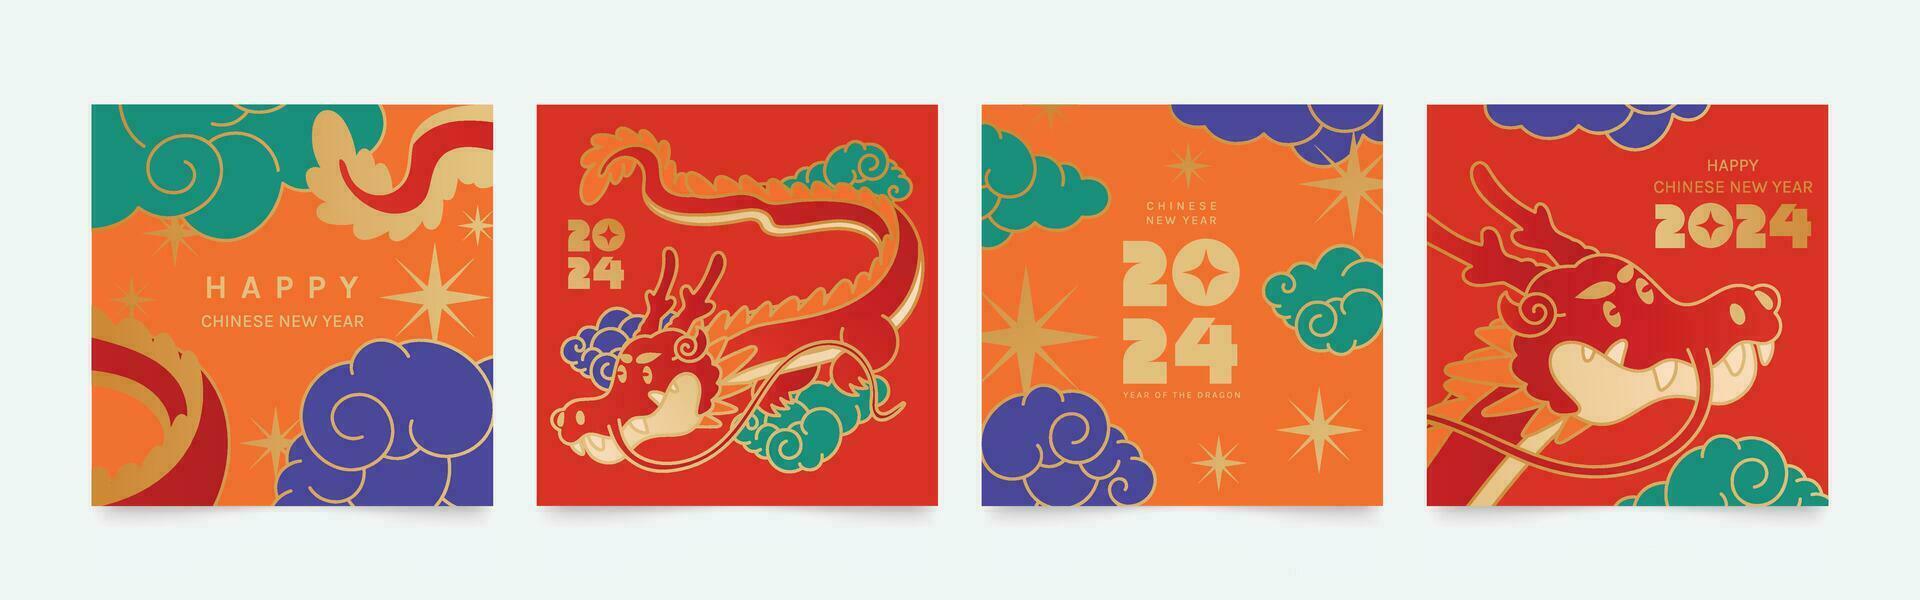 Chinese New Year square cover background vector. Year of the dragon design with dragon, cloud, sparkle. Modern colorful oriental illustration for cover, banner, website, social media, card, poster. vector